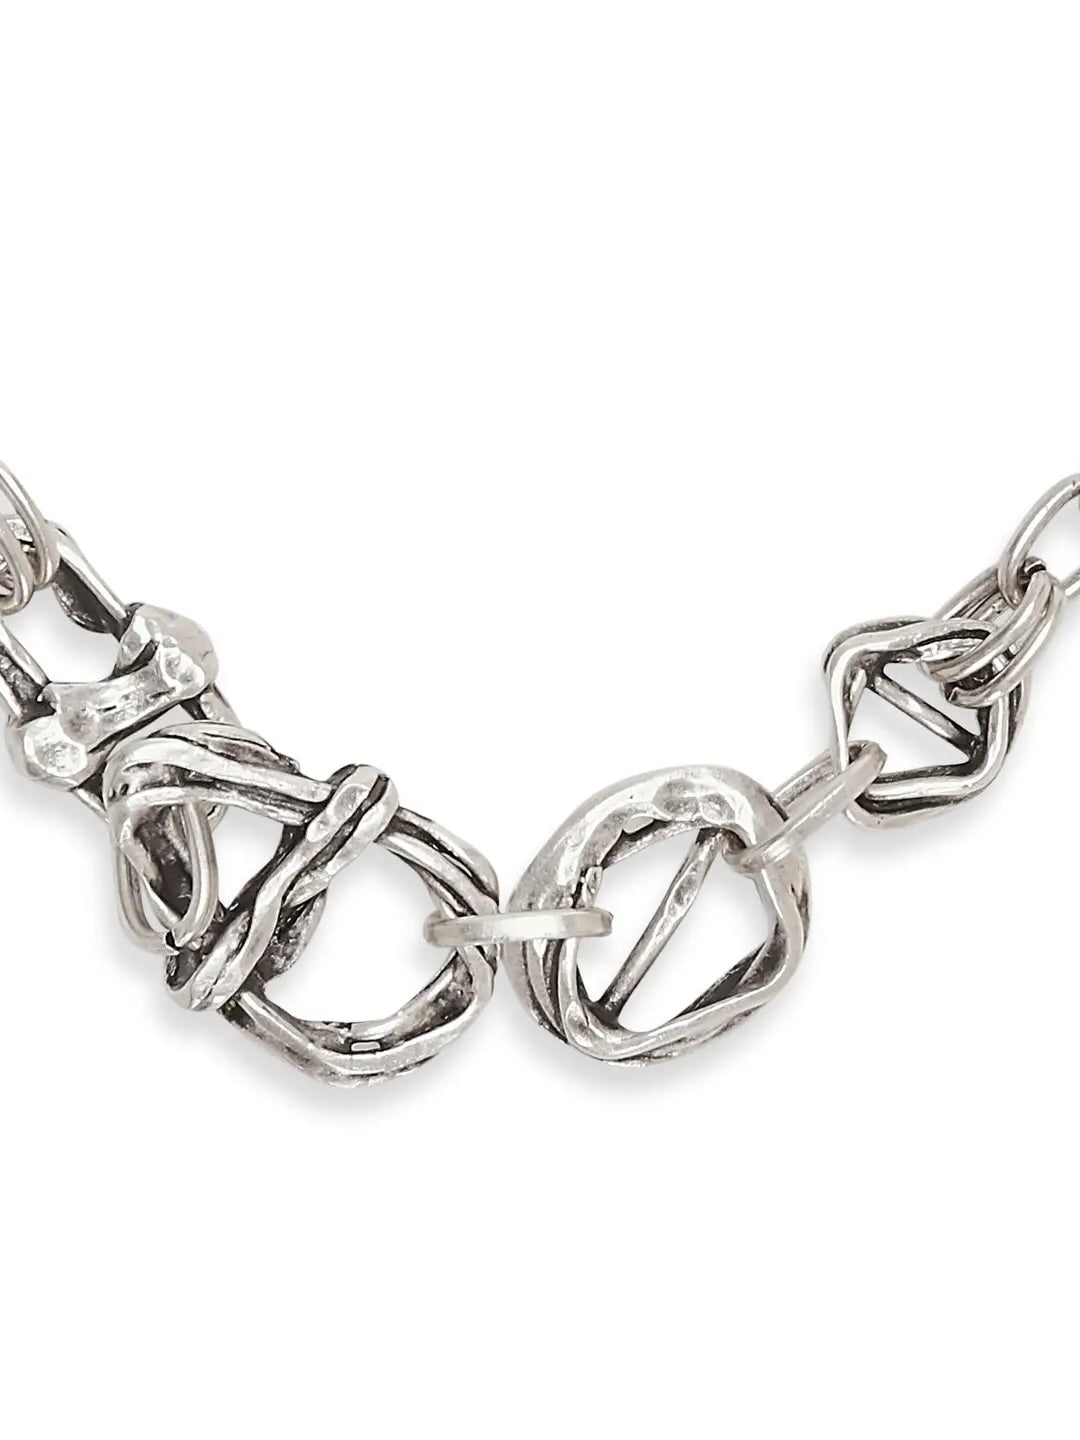 CHAIN LINK NECKLACE